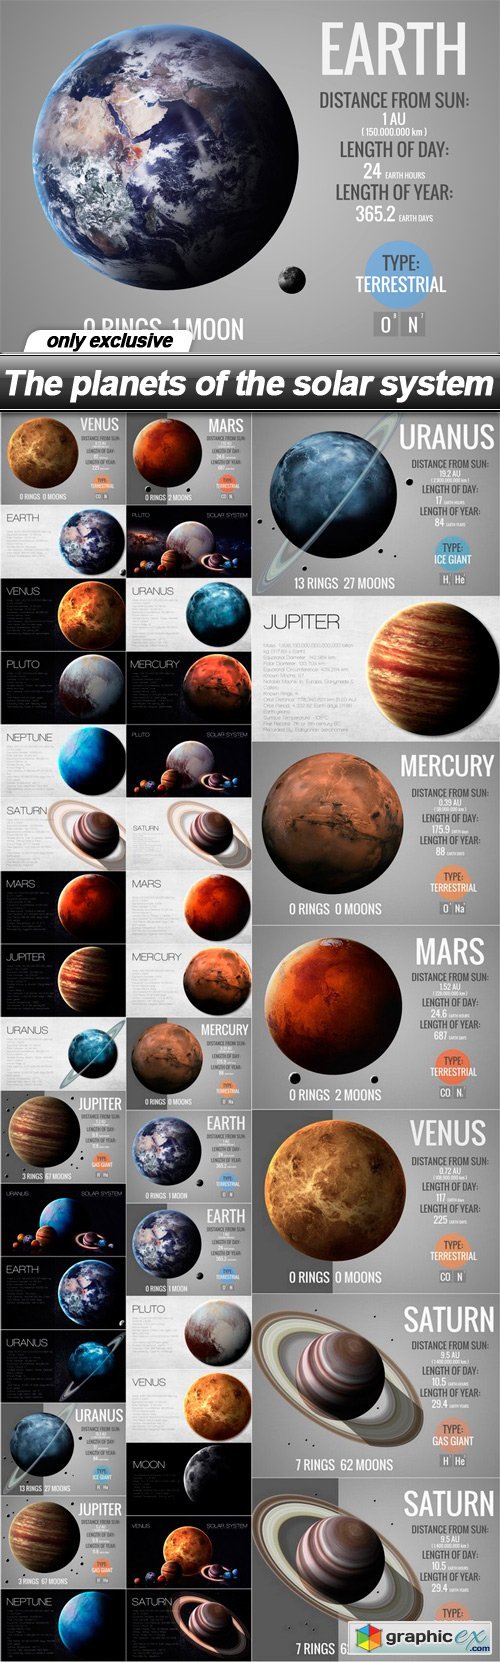 The planets of the solar system - 39 UHQ JPEG